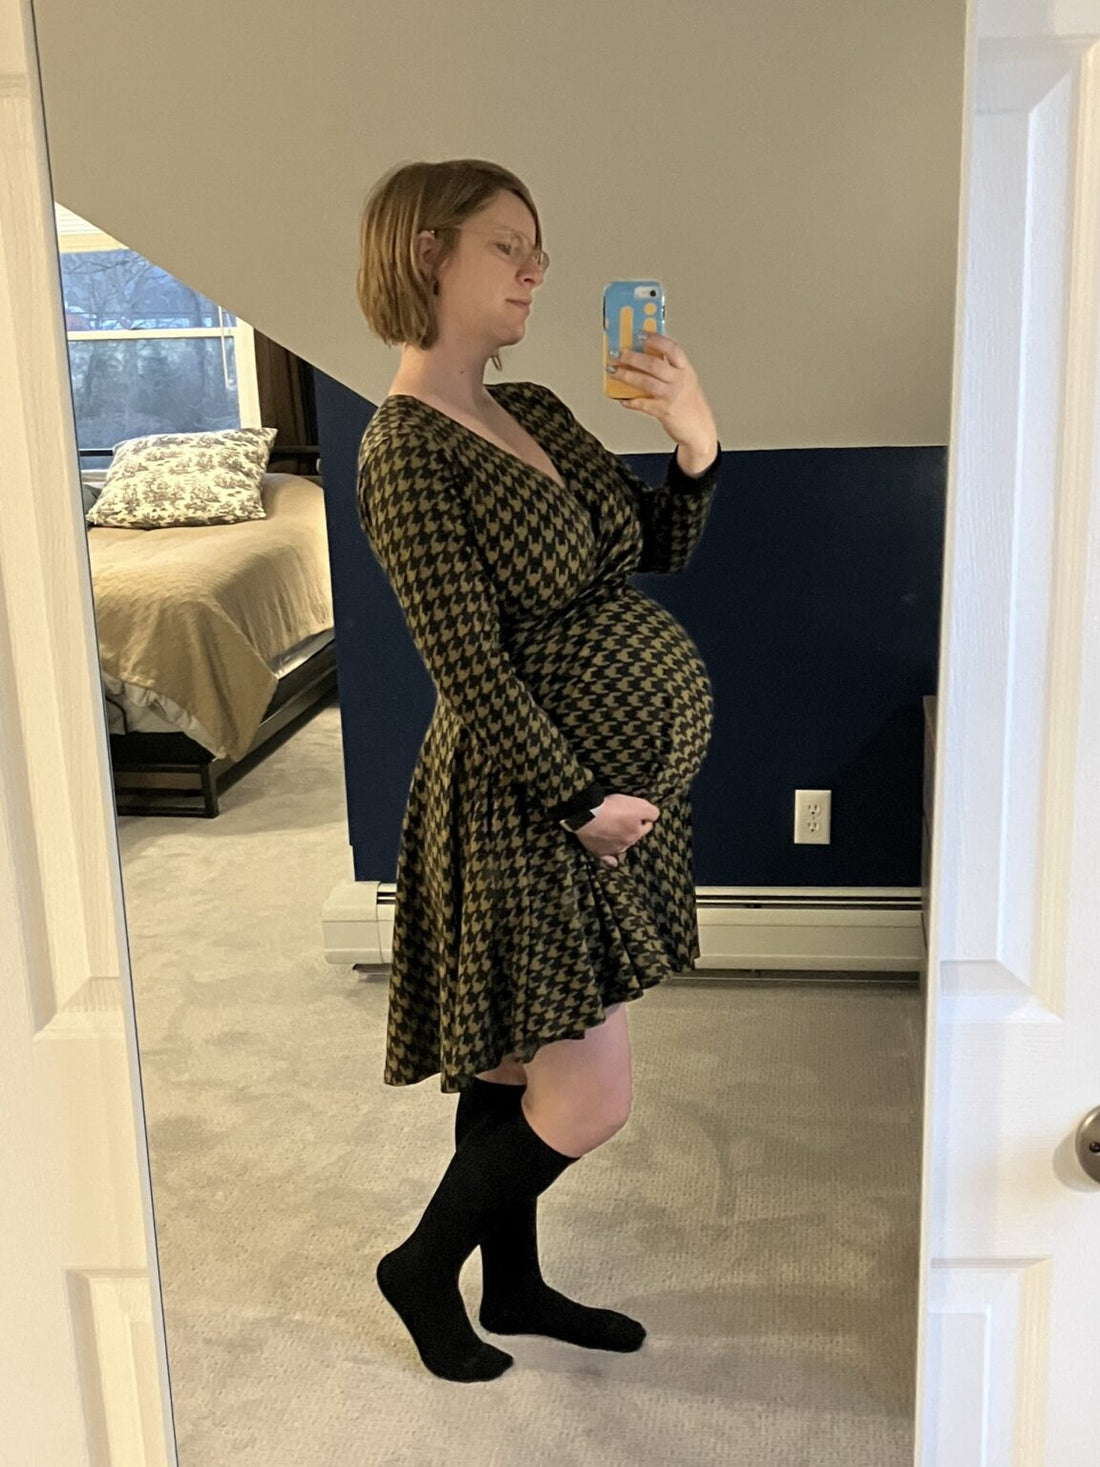 Off the Rack ~ The Full-Bust Maternity Clothing Landscape STINKS –